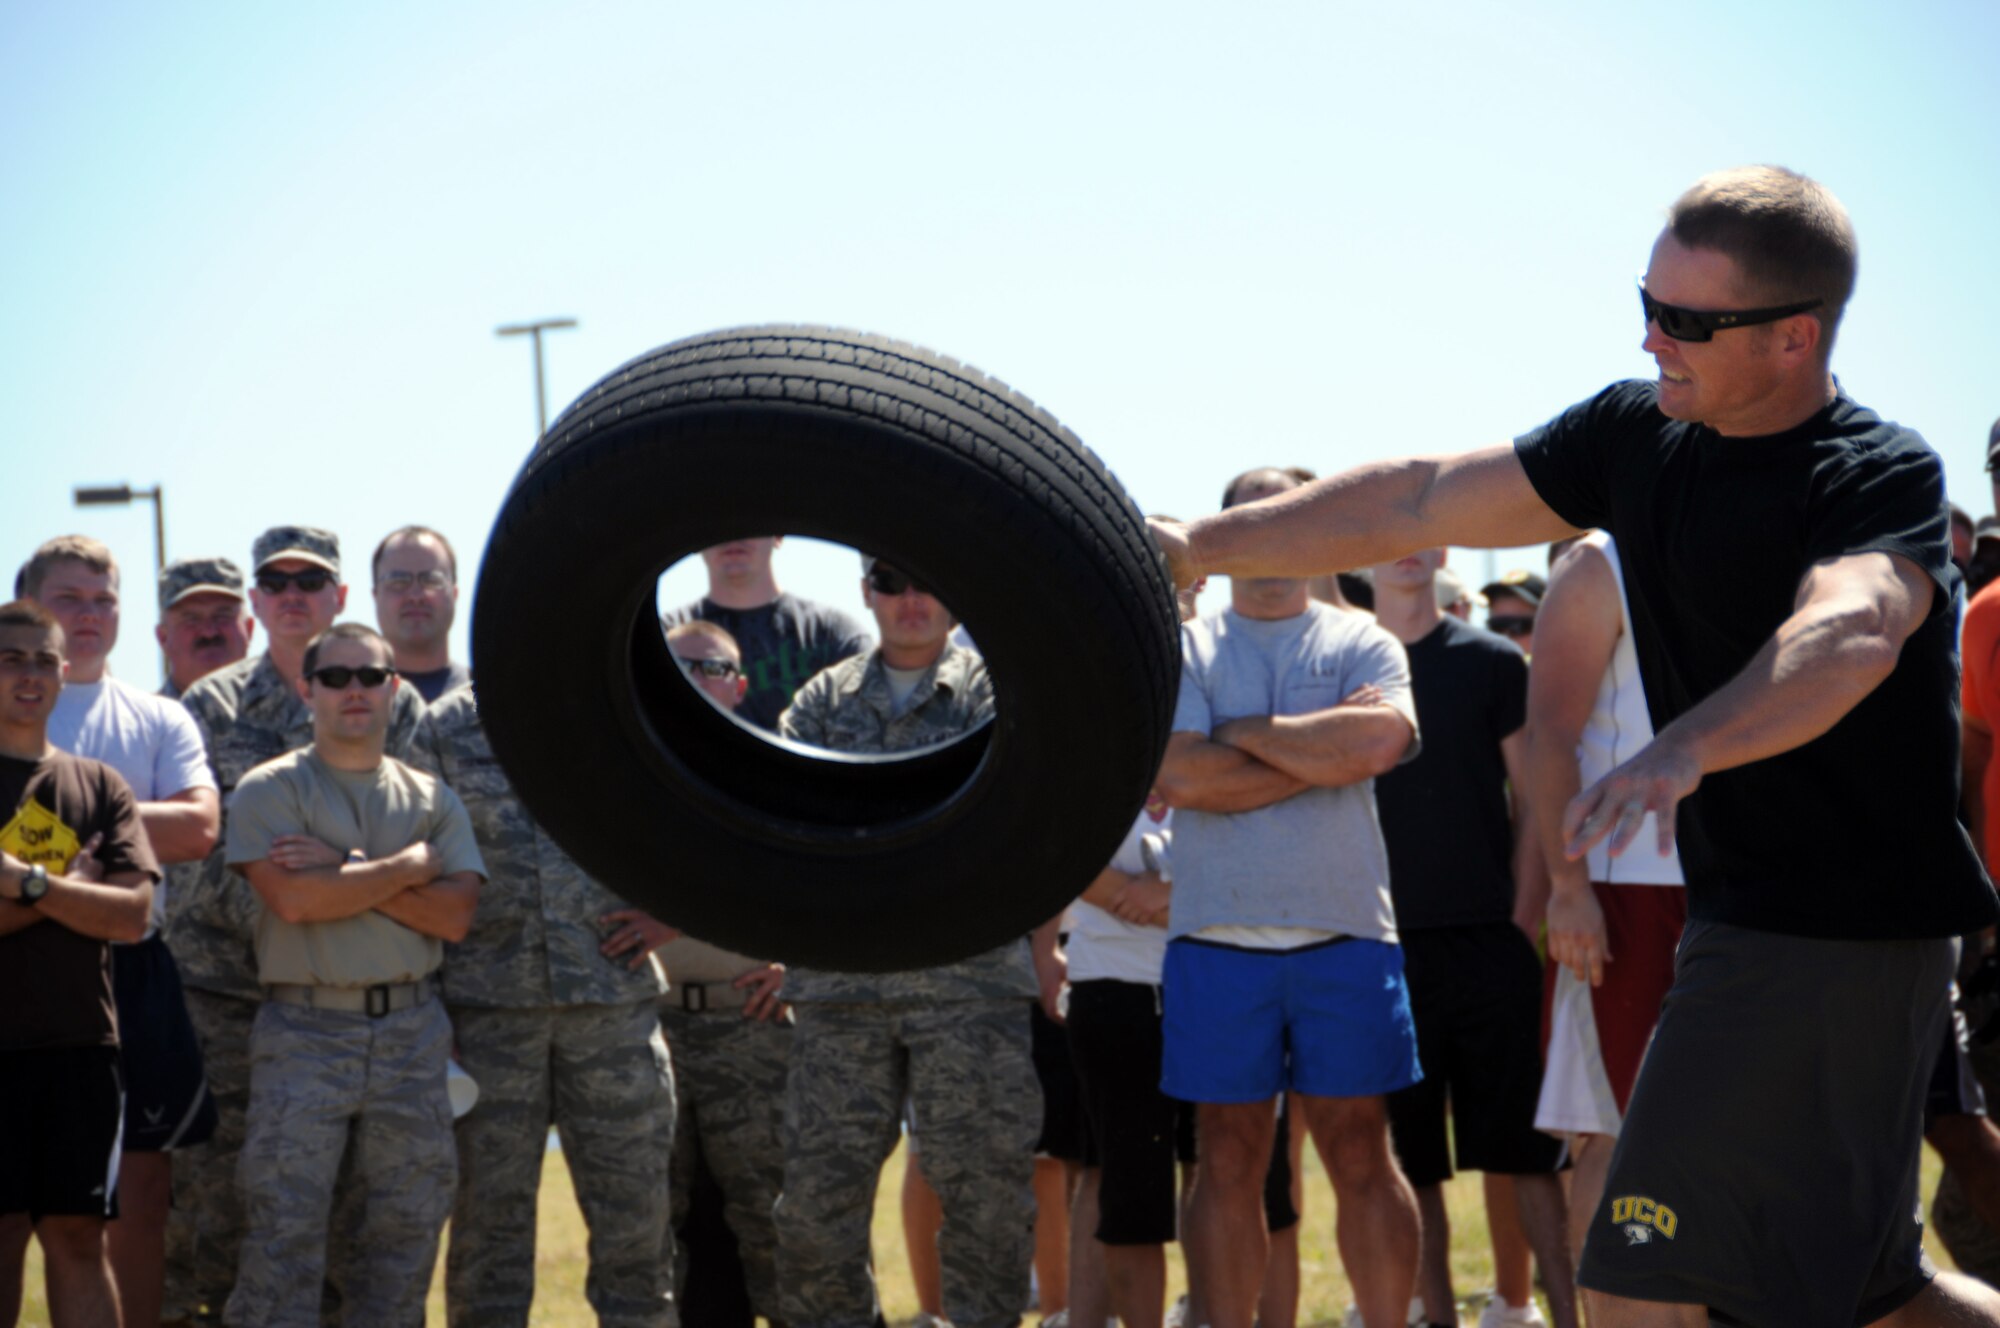 Tech. Sgt. Benjamin Cowart, assigned to the 137th Maintenance Group,  hurls a tire downrange in the tire toss competition during the base Olympics. One at a time, Cowart and other competitors had to find their own unique way of tossing the tire as far as they could.

(U.S. Air Force Photo by Staff Sgt Caroline Hayworth/Released)